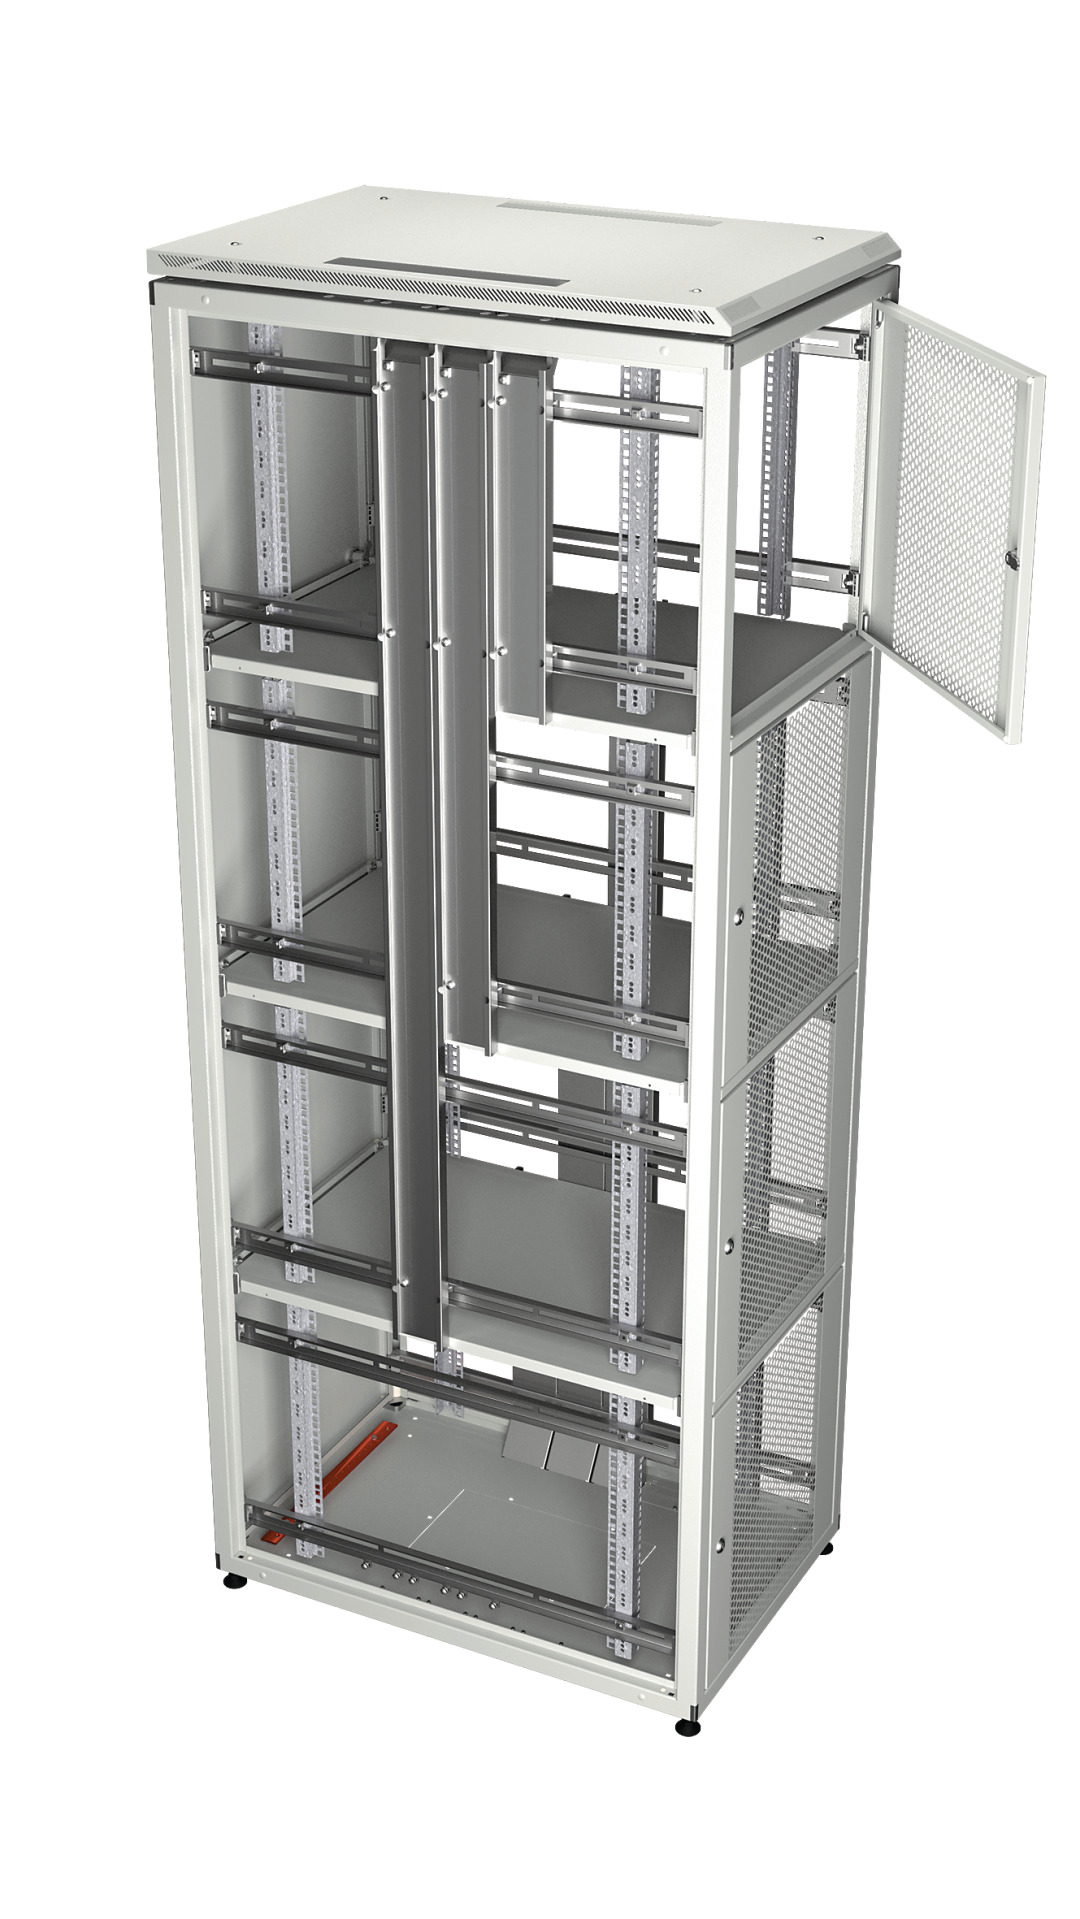 Co-Location Rack PRO, 4 x 11HE, 600x1000 mm, F+R 1-tlg. perforiert, RAL7035